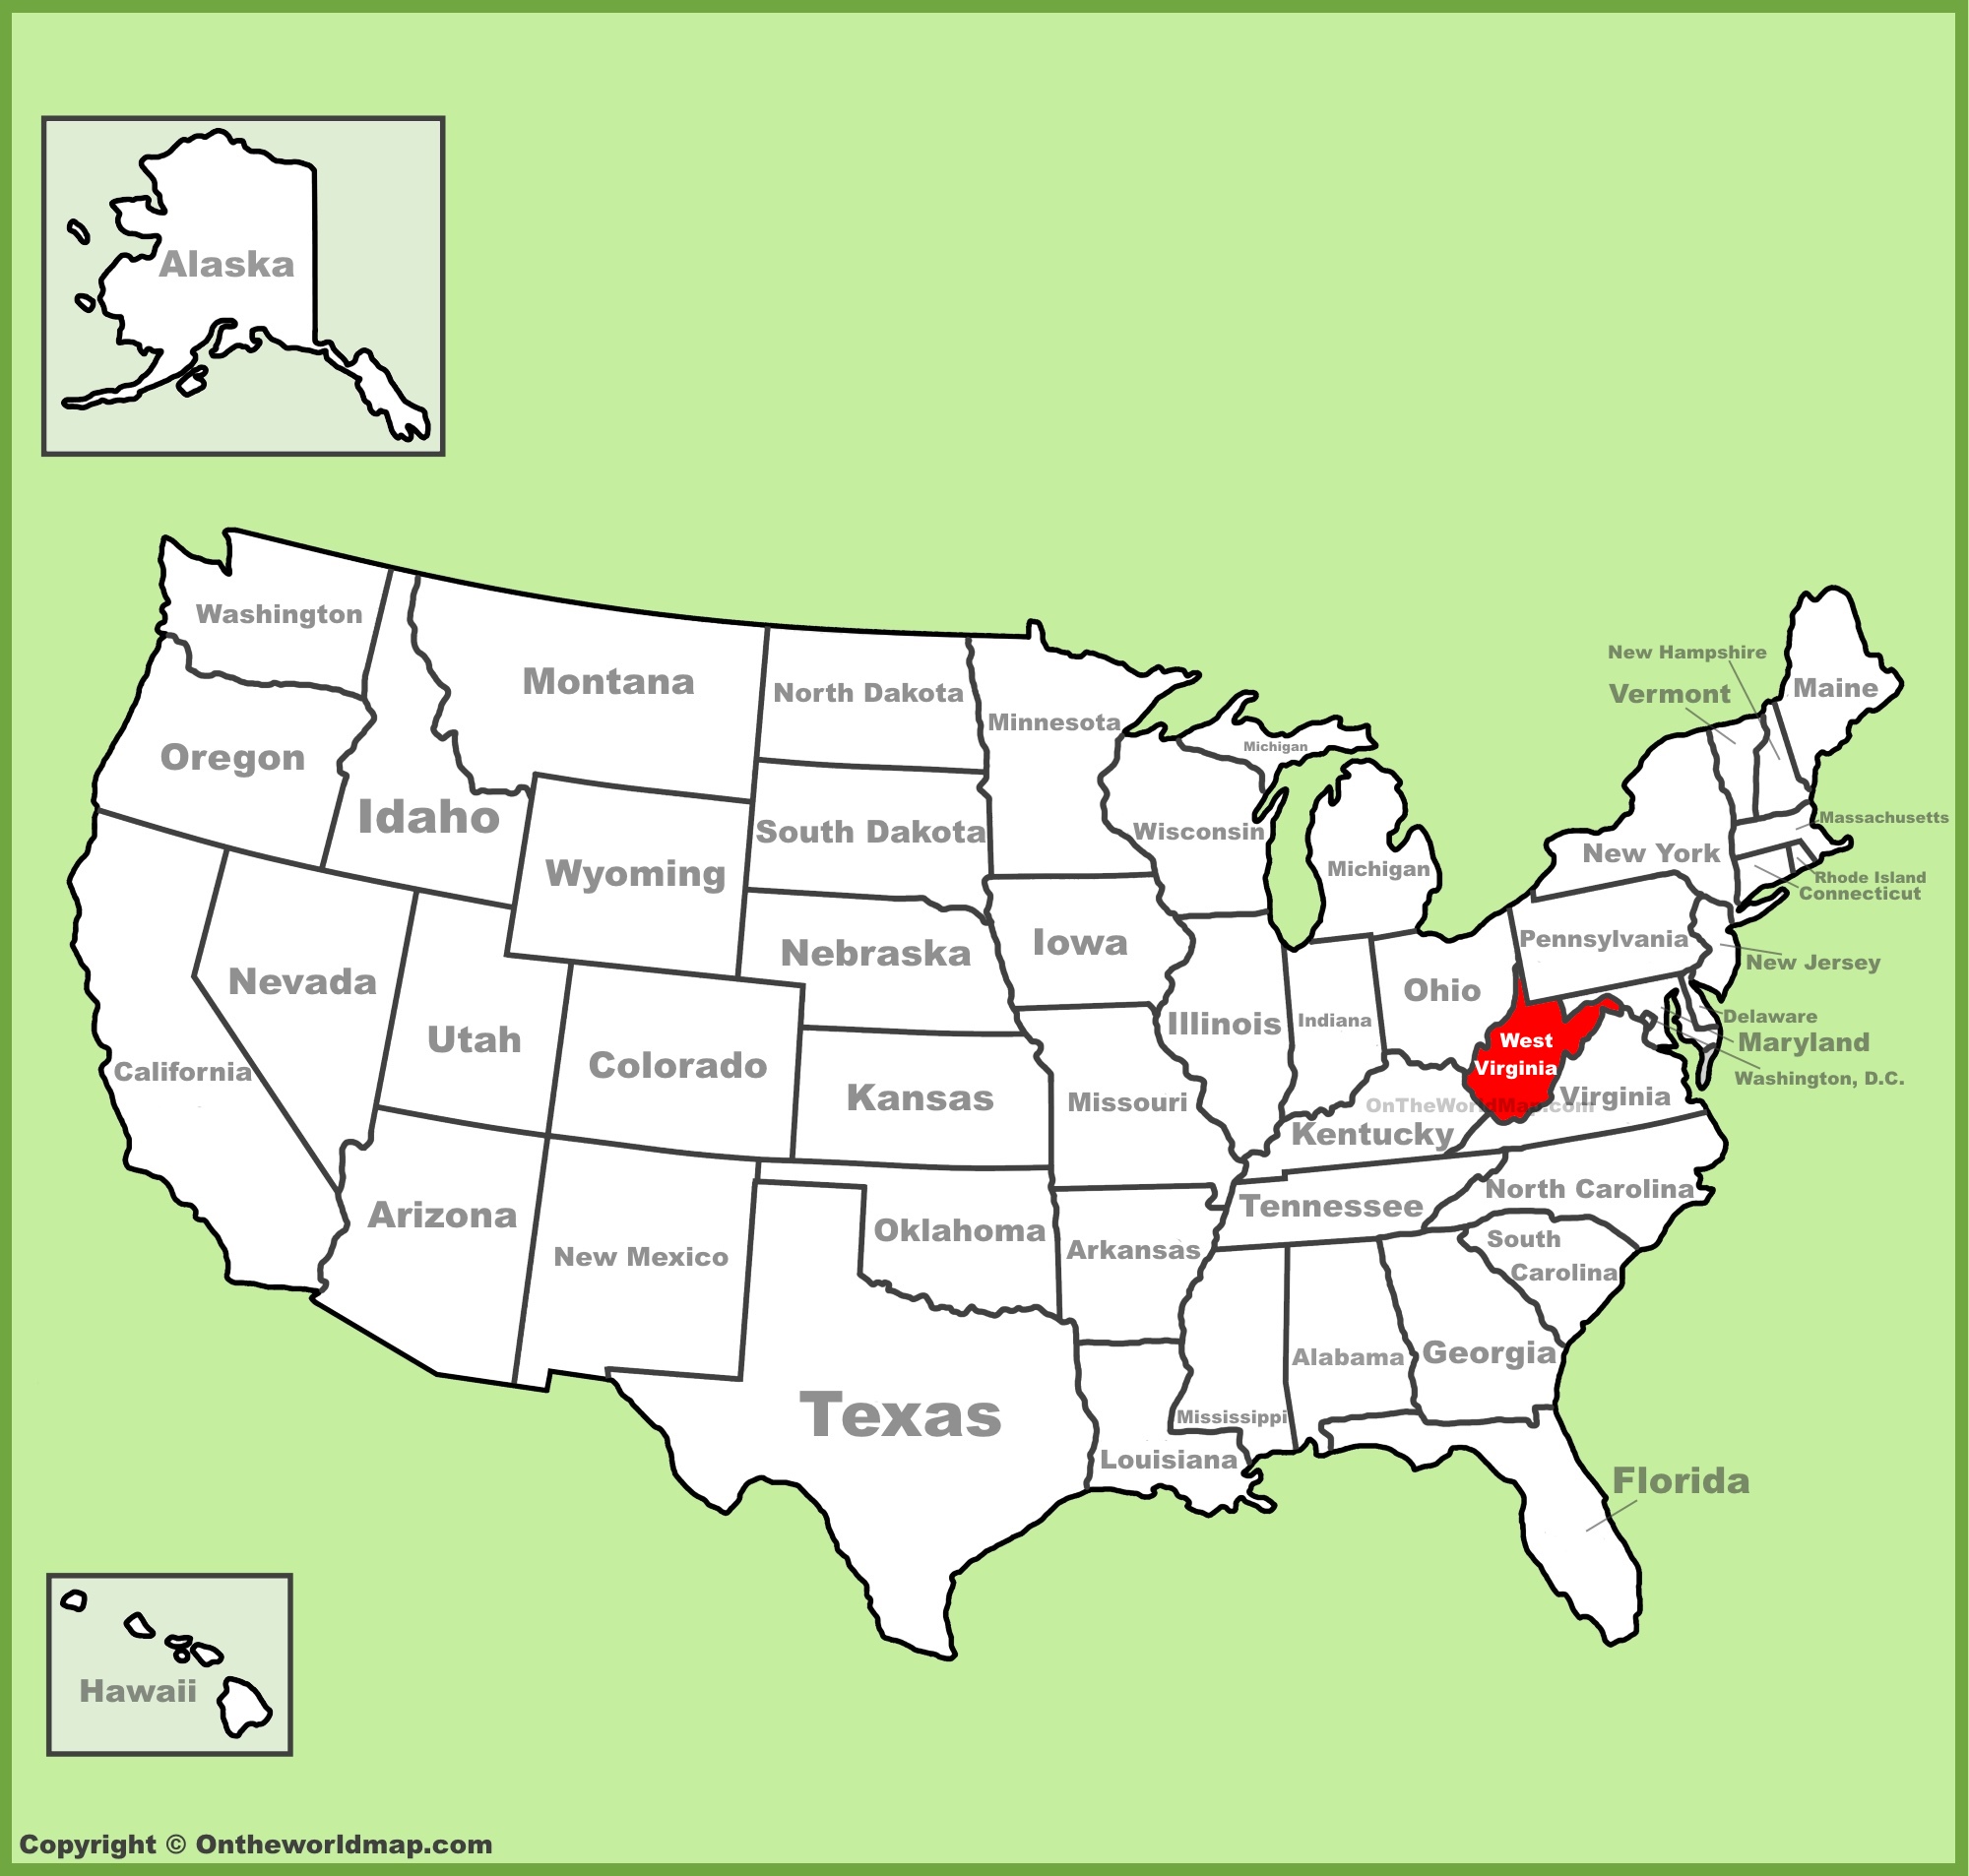 West Virginia State Maps | USA | Maps of West Virginia (WV) ﻿